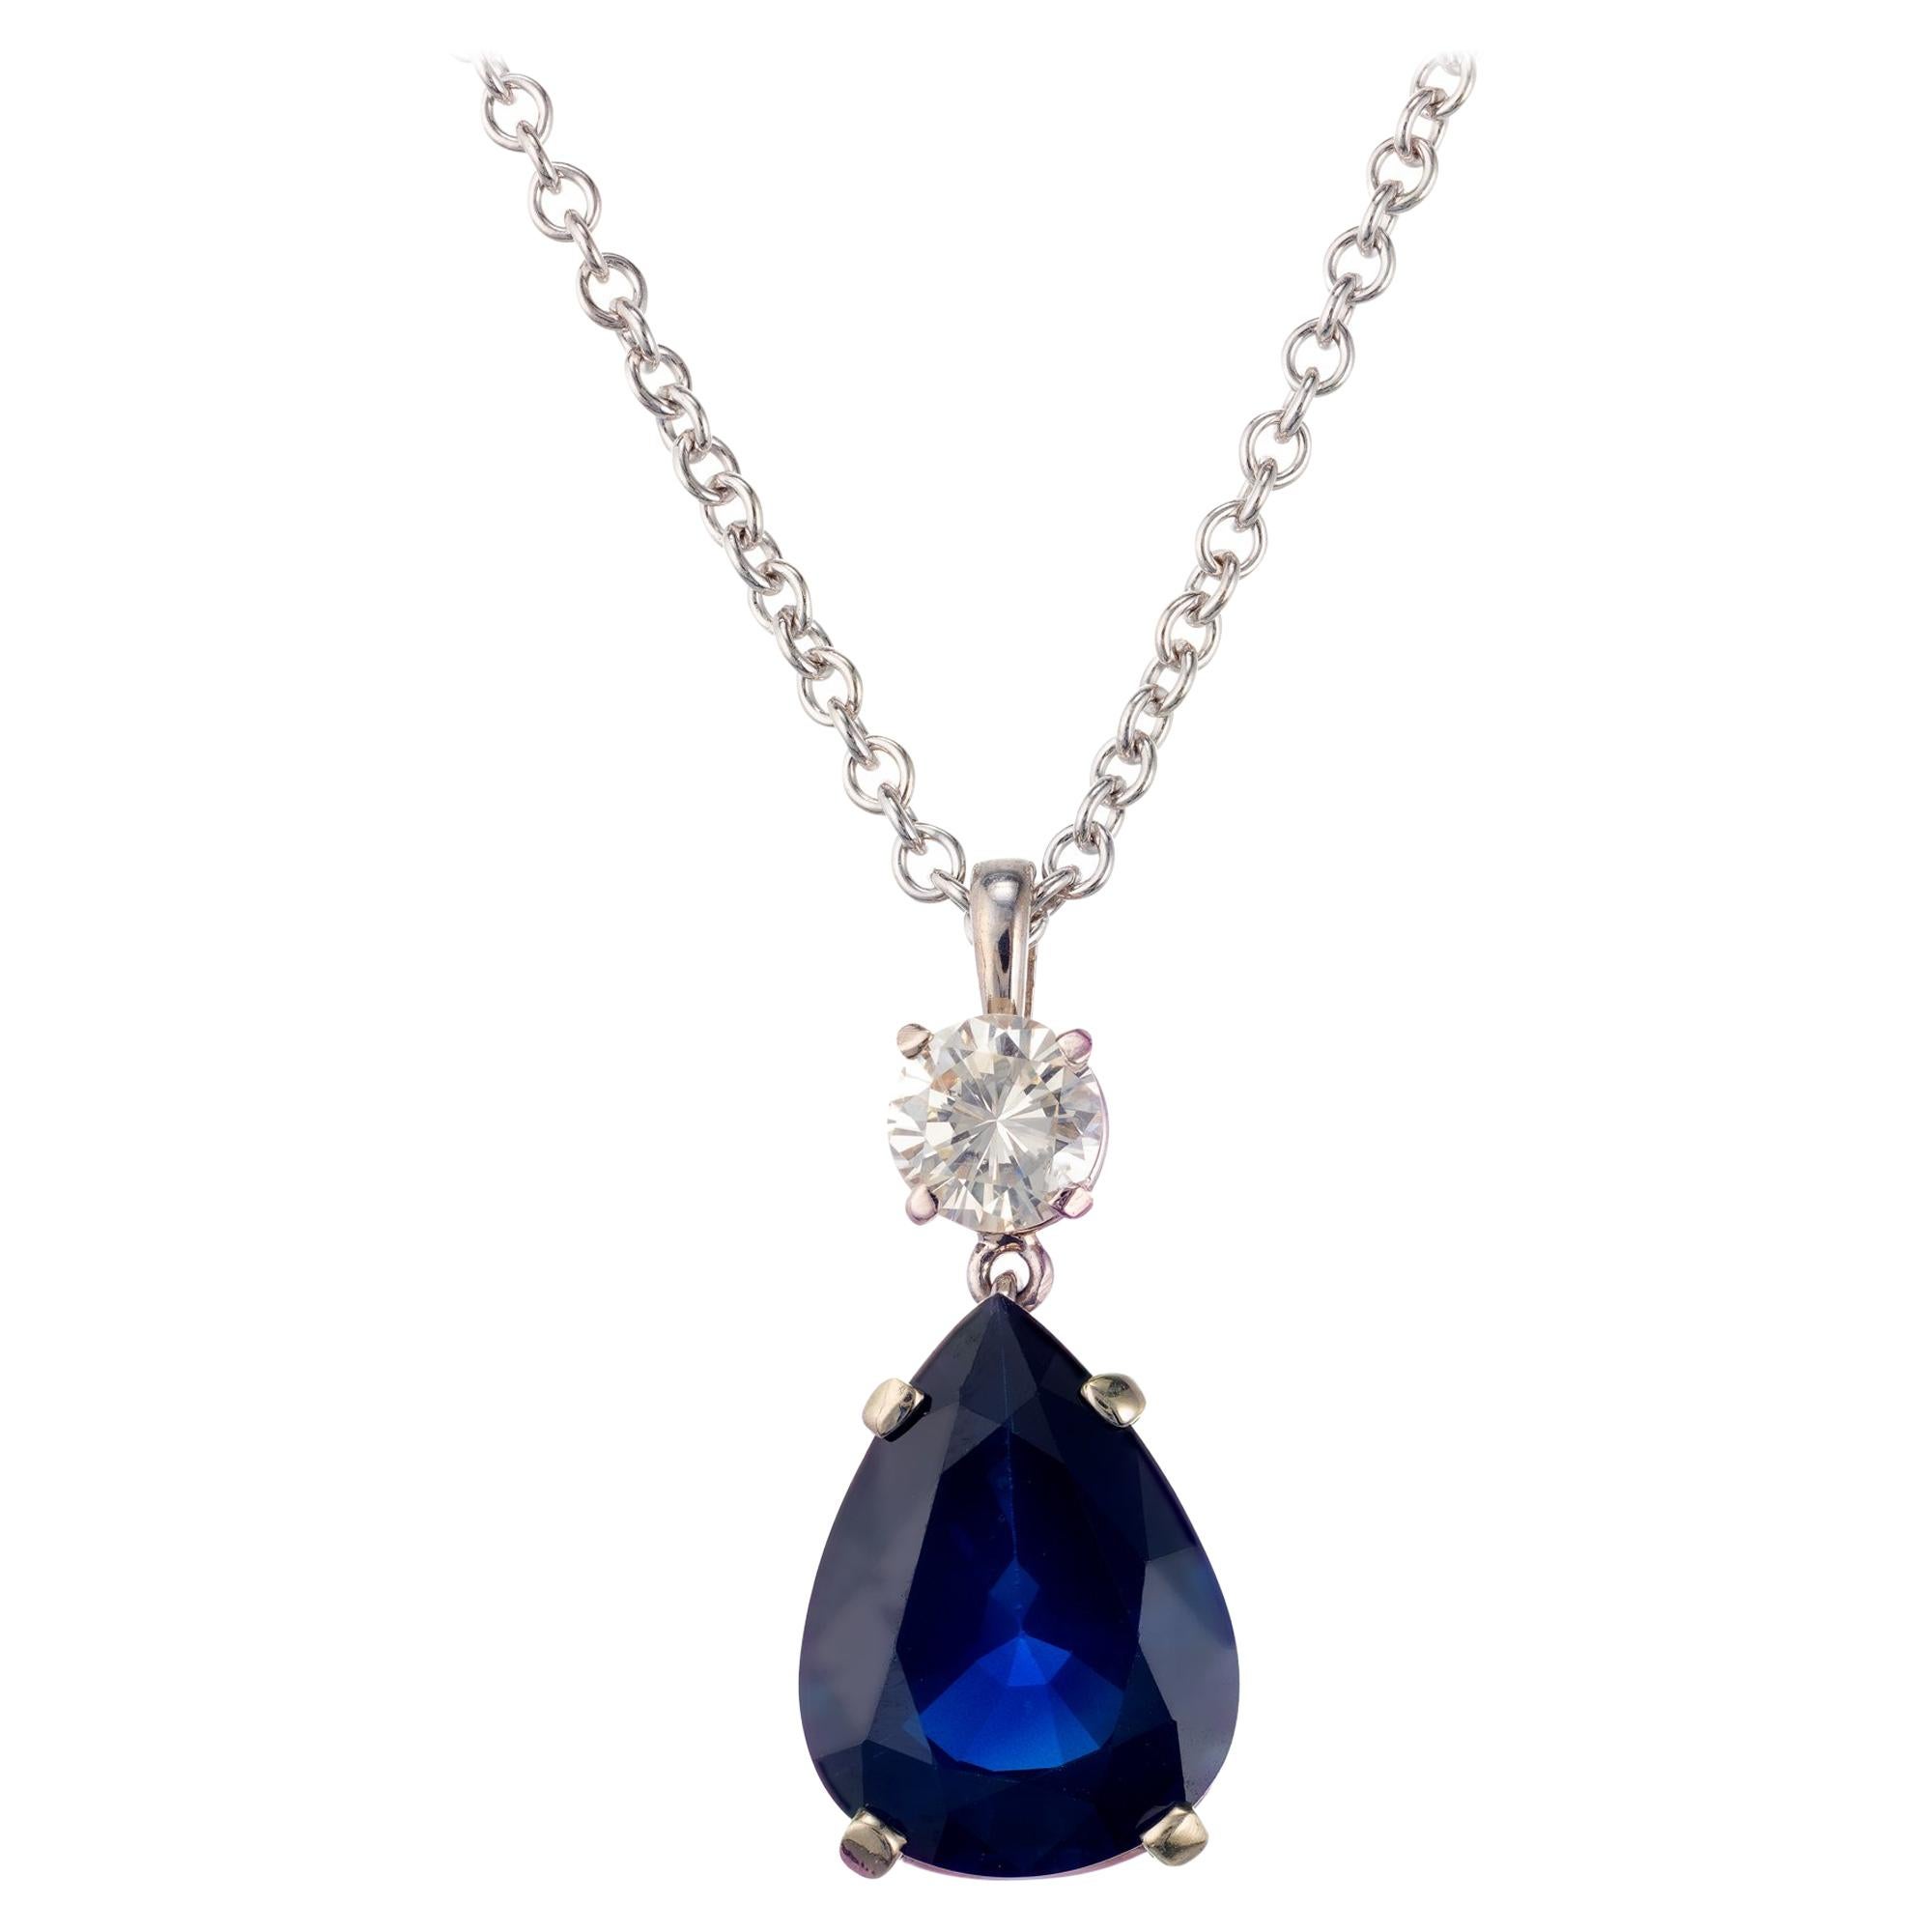 Peter Suchy GIA Certified 3.59 Carat Sapphire Diamond Gold Pendant Necklace